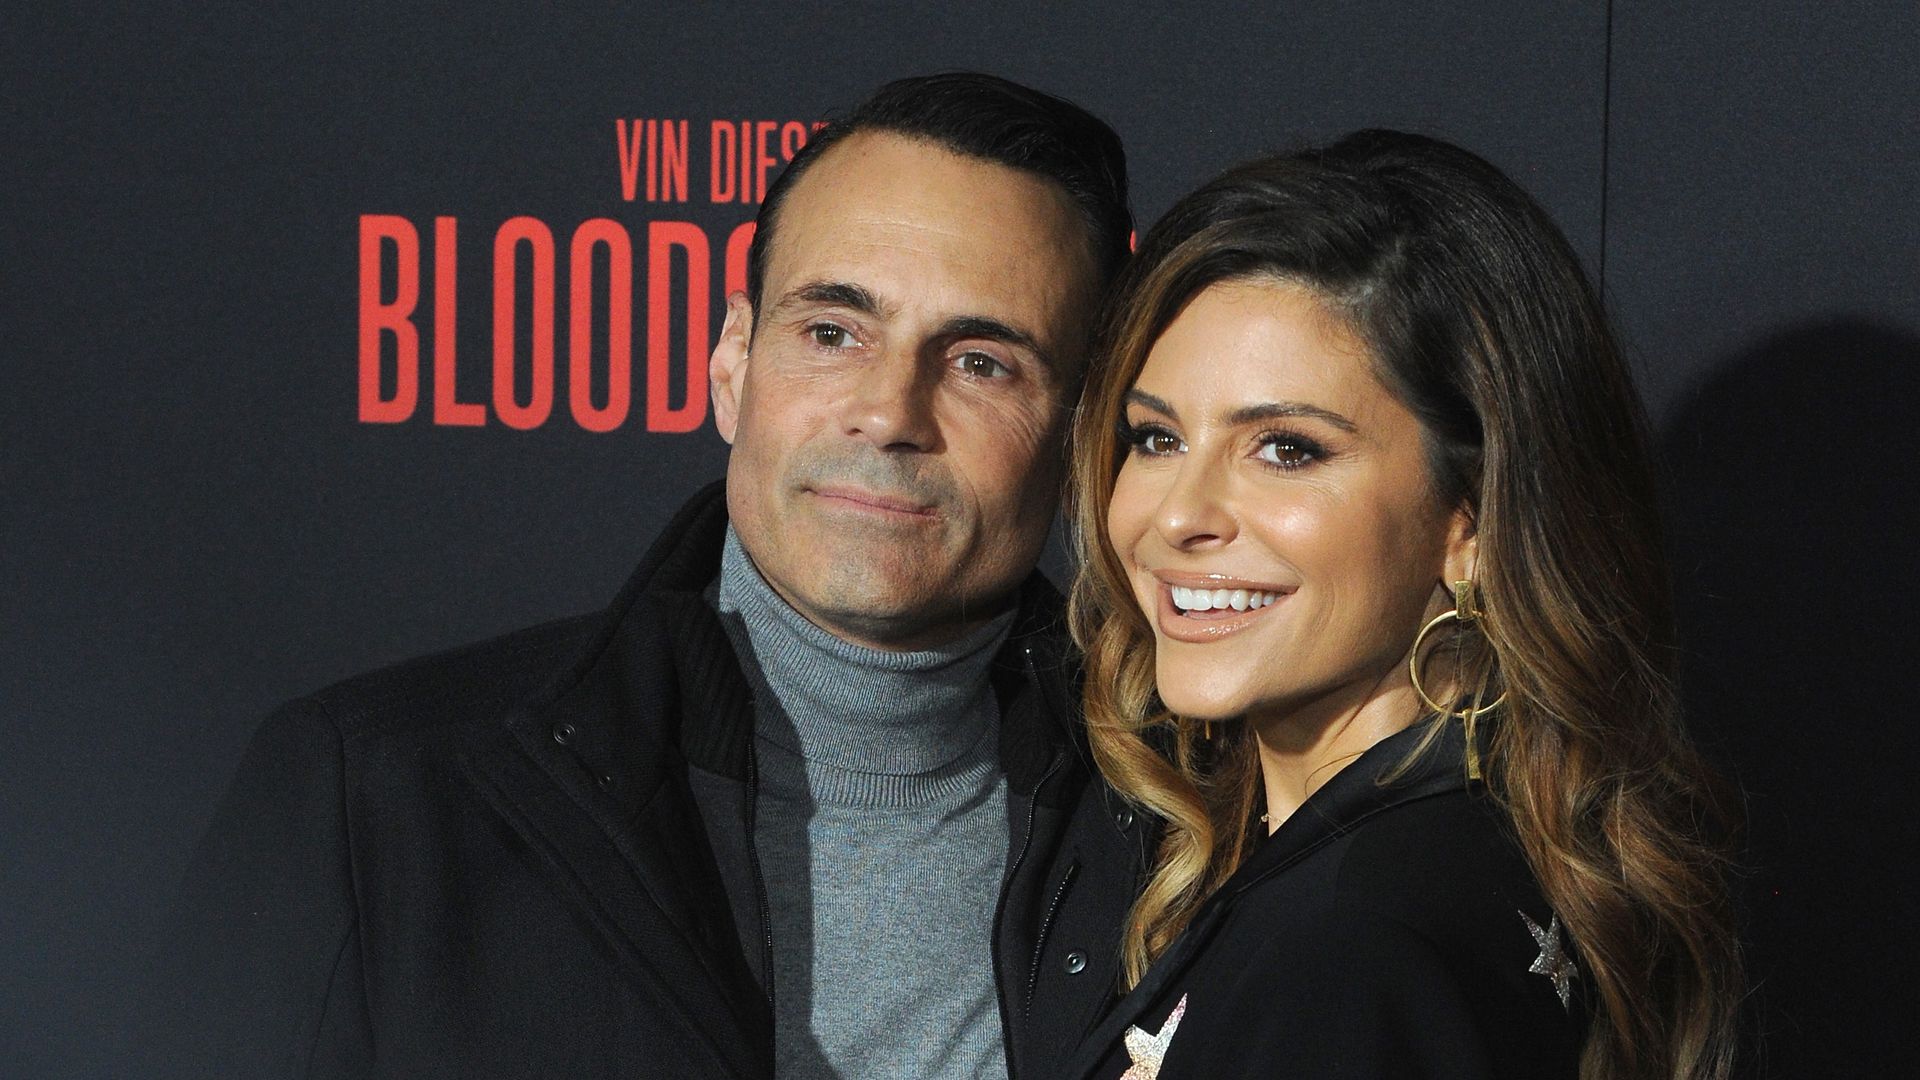 Keven Undergaro and Maria Menounos arrive for the Premiere Of Sony Pictures' "Bloodshot"  held at The Regency Village on March 10, 2020 in Los Angeles, California